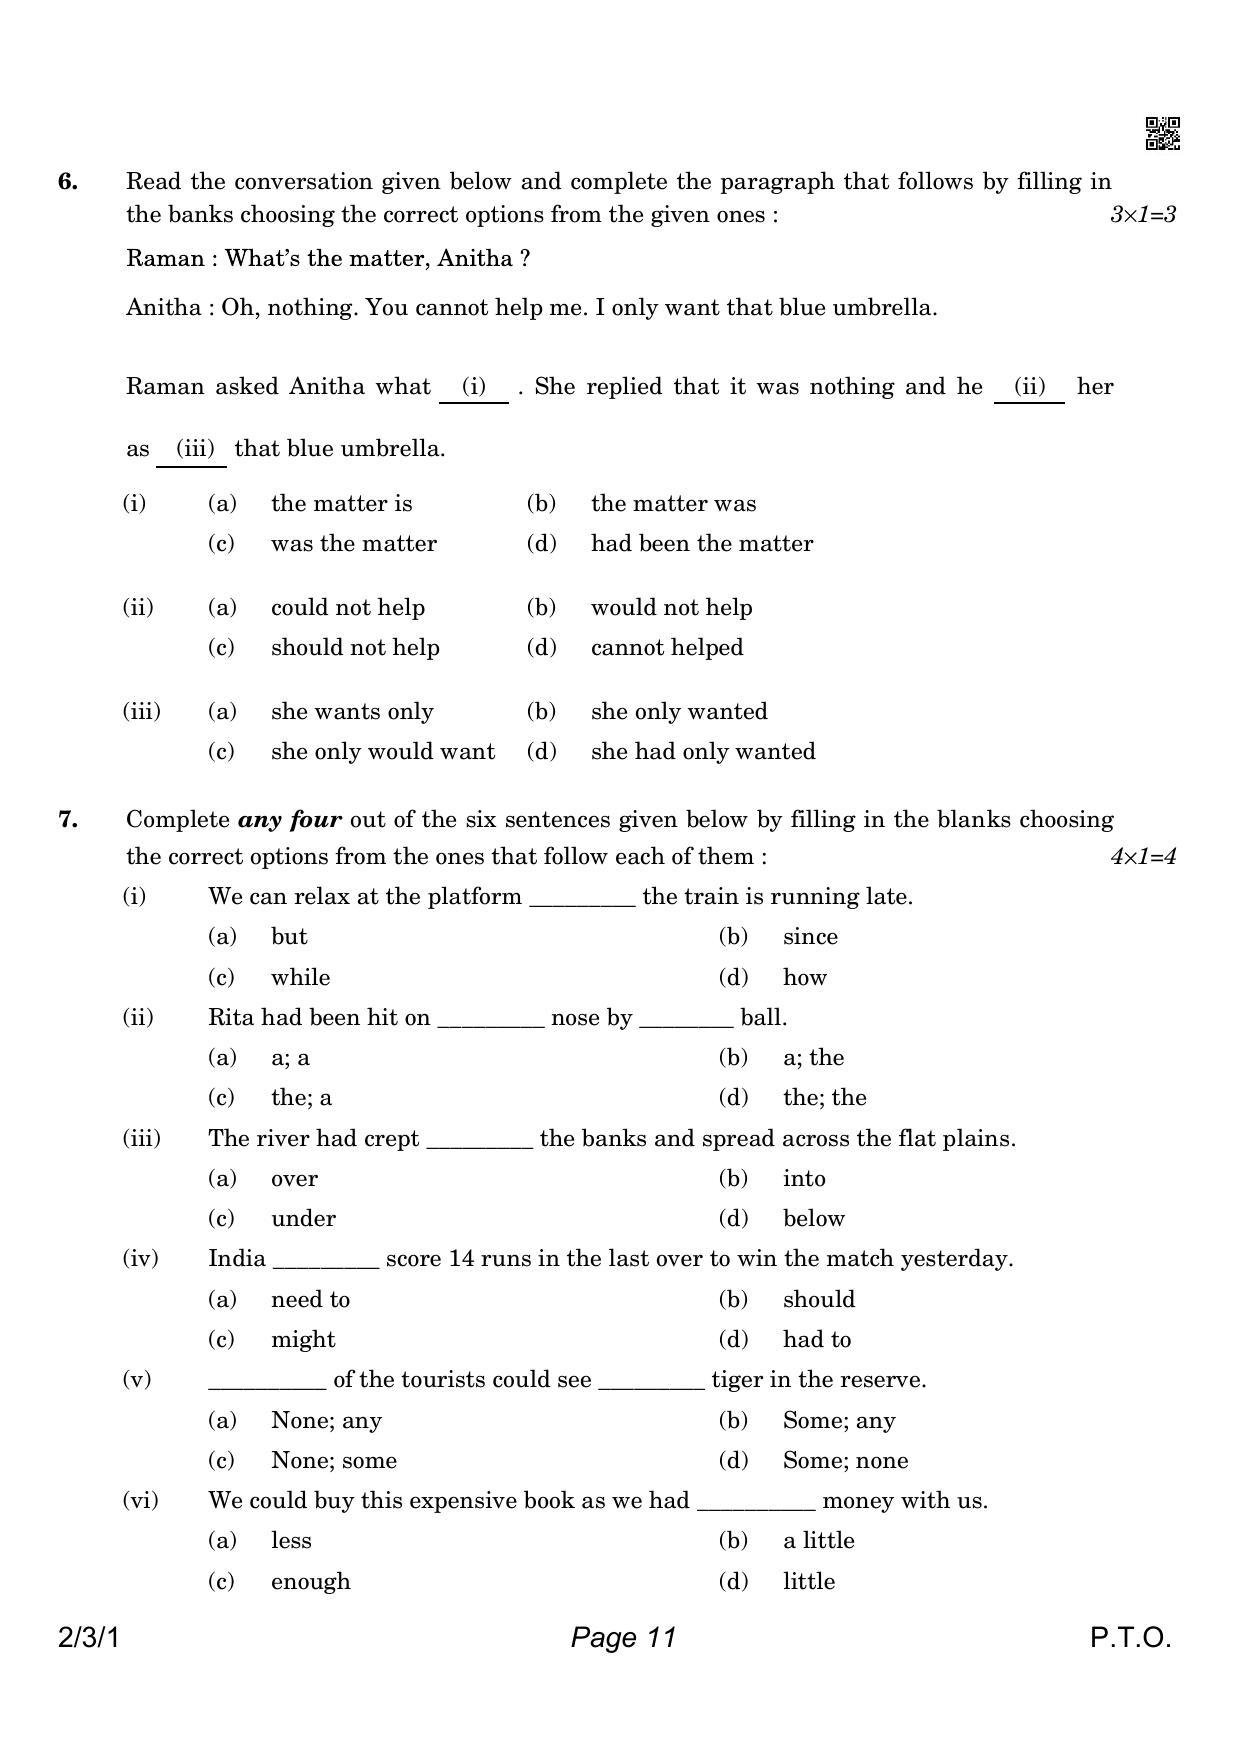 CBSE Class 10 QP_184_ENGLISH_LANGUAGE_AND_LITERATURE 2021 Compartment Question Paper - Page 11